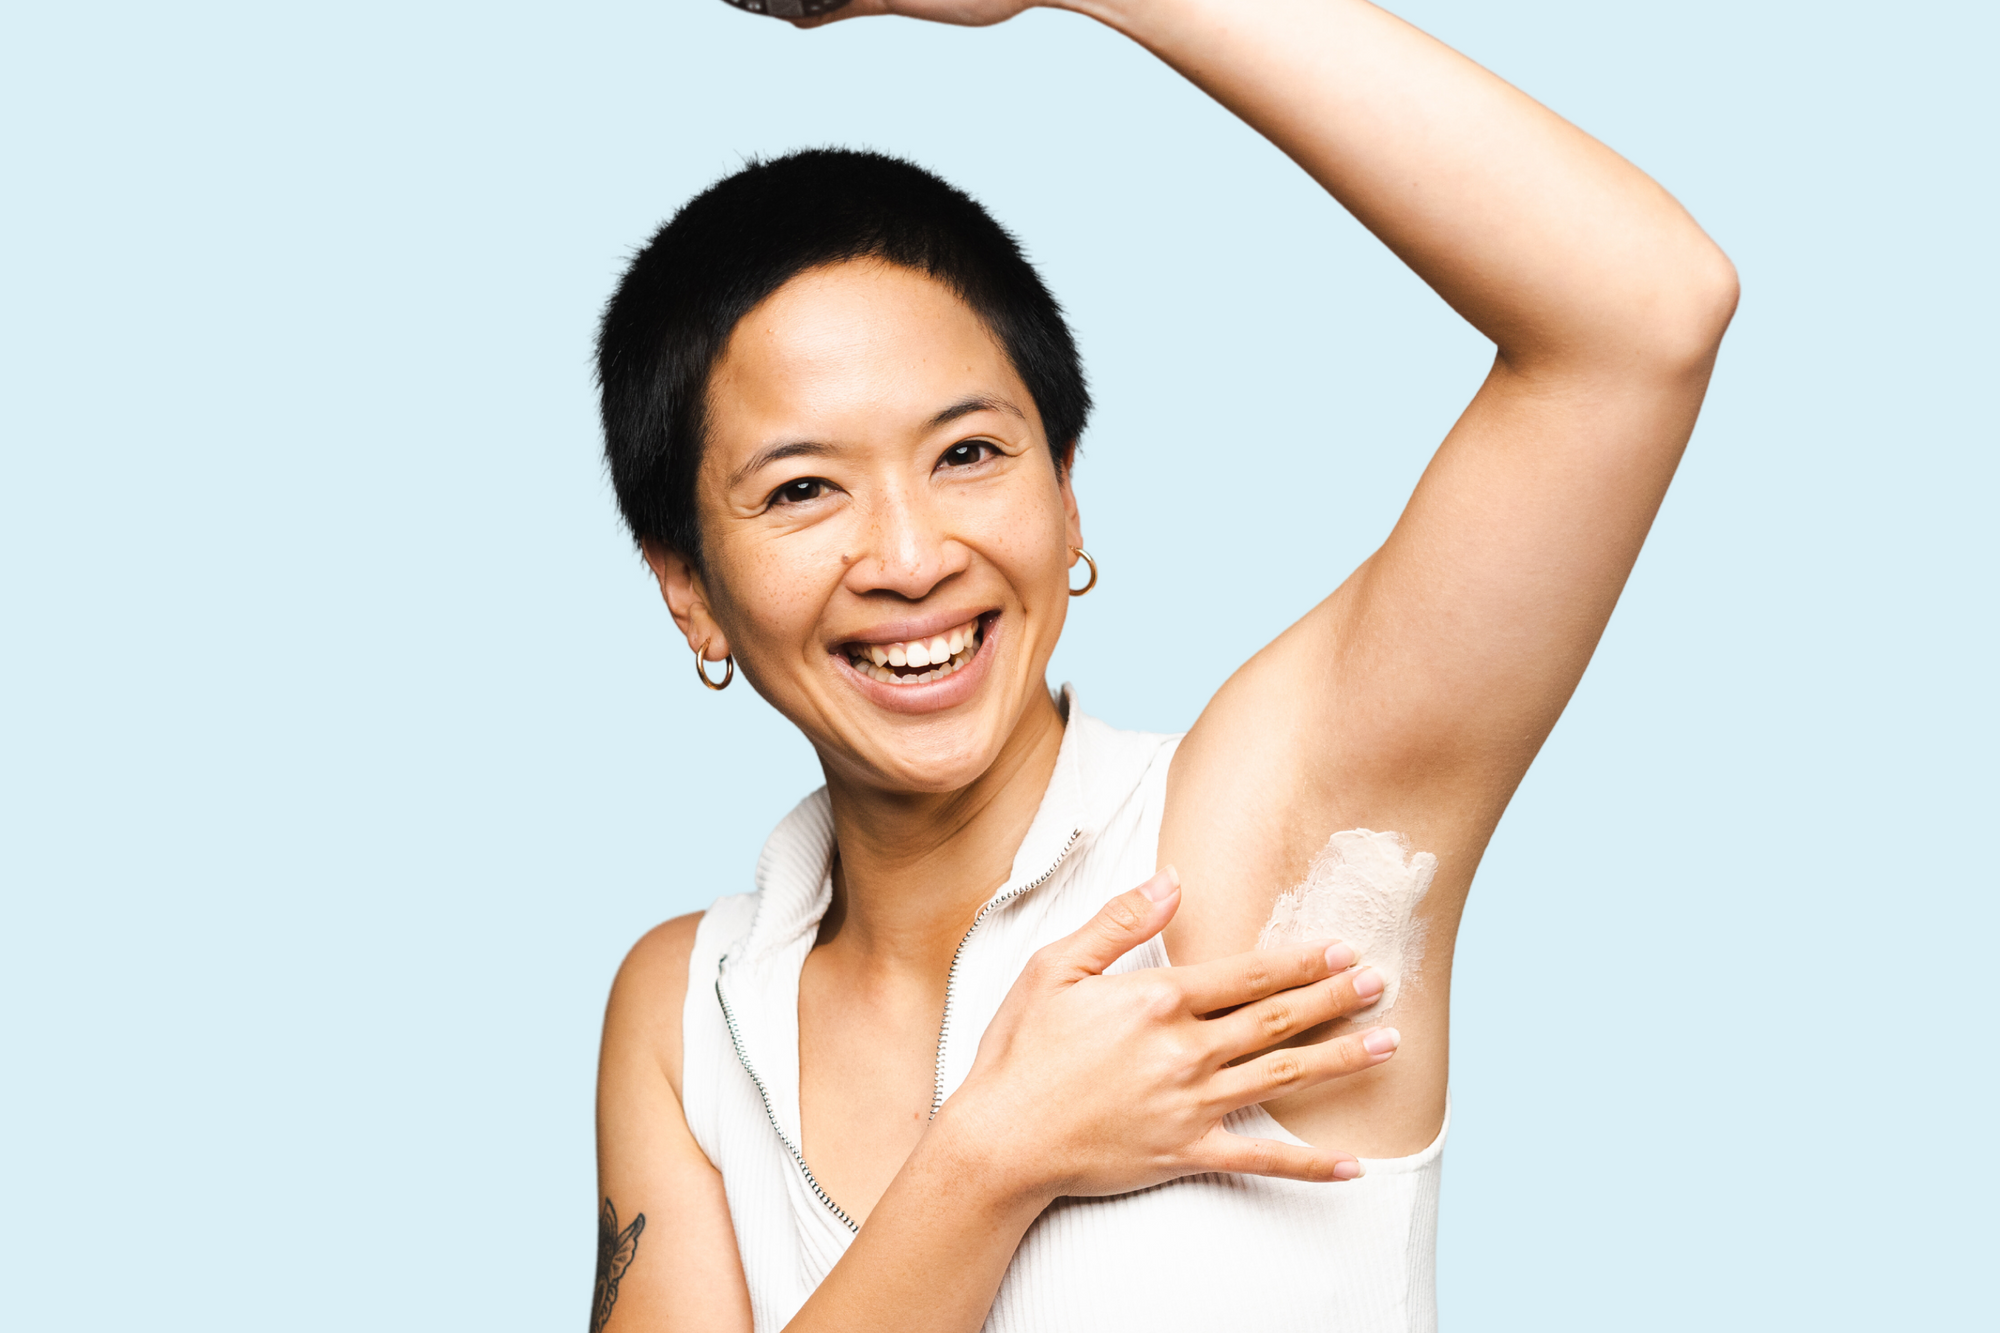 How to use your Armpit Detox Mask